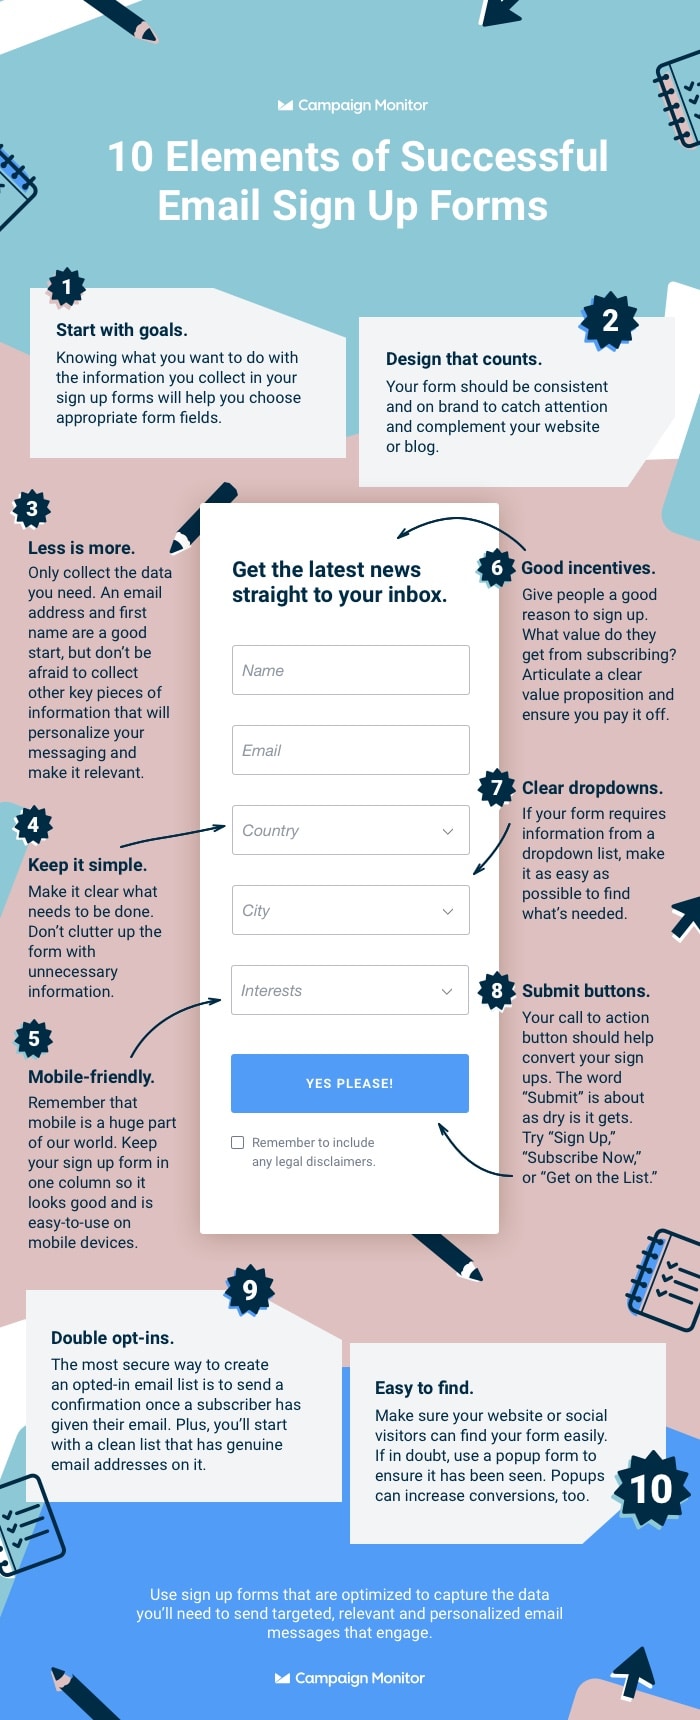 Email sign up form infographic